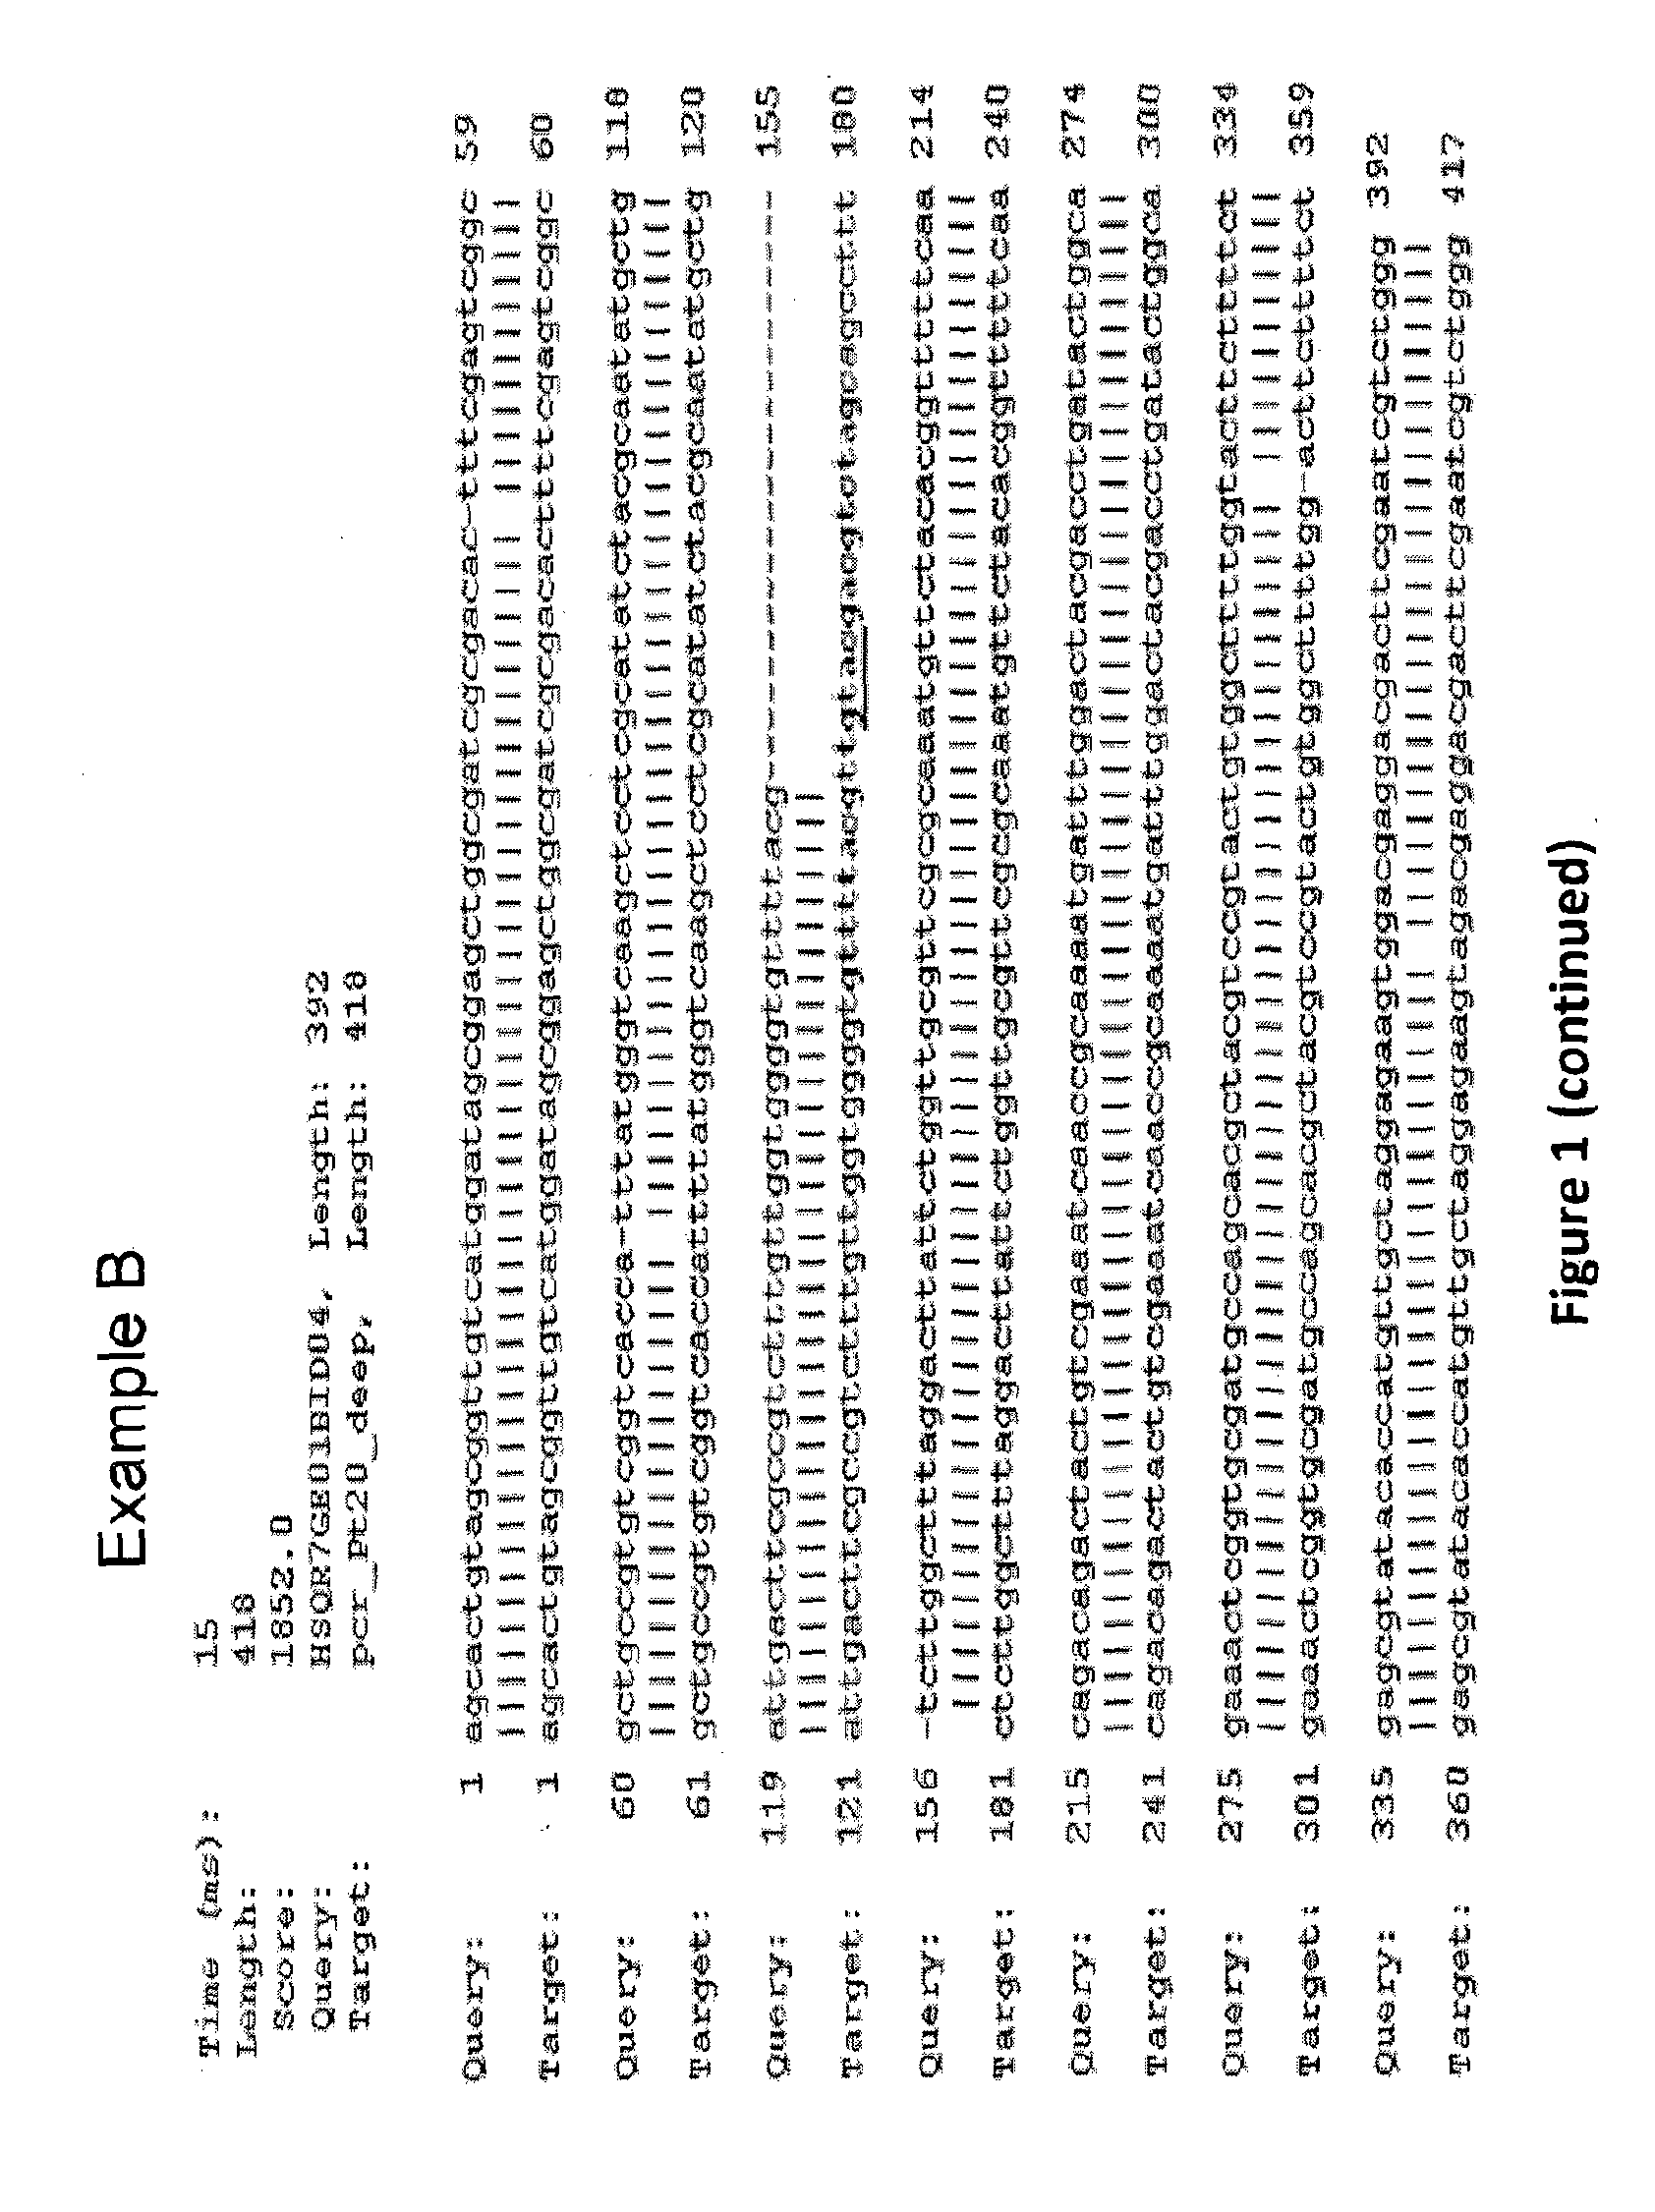 Method for targeted modification of algae genomes